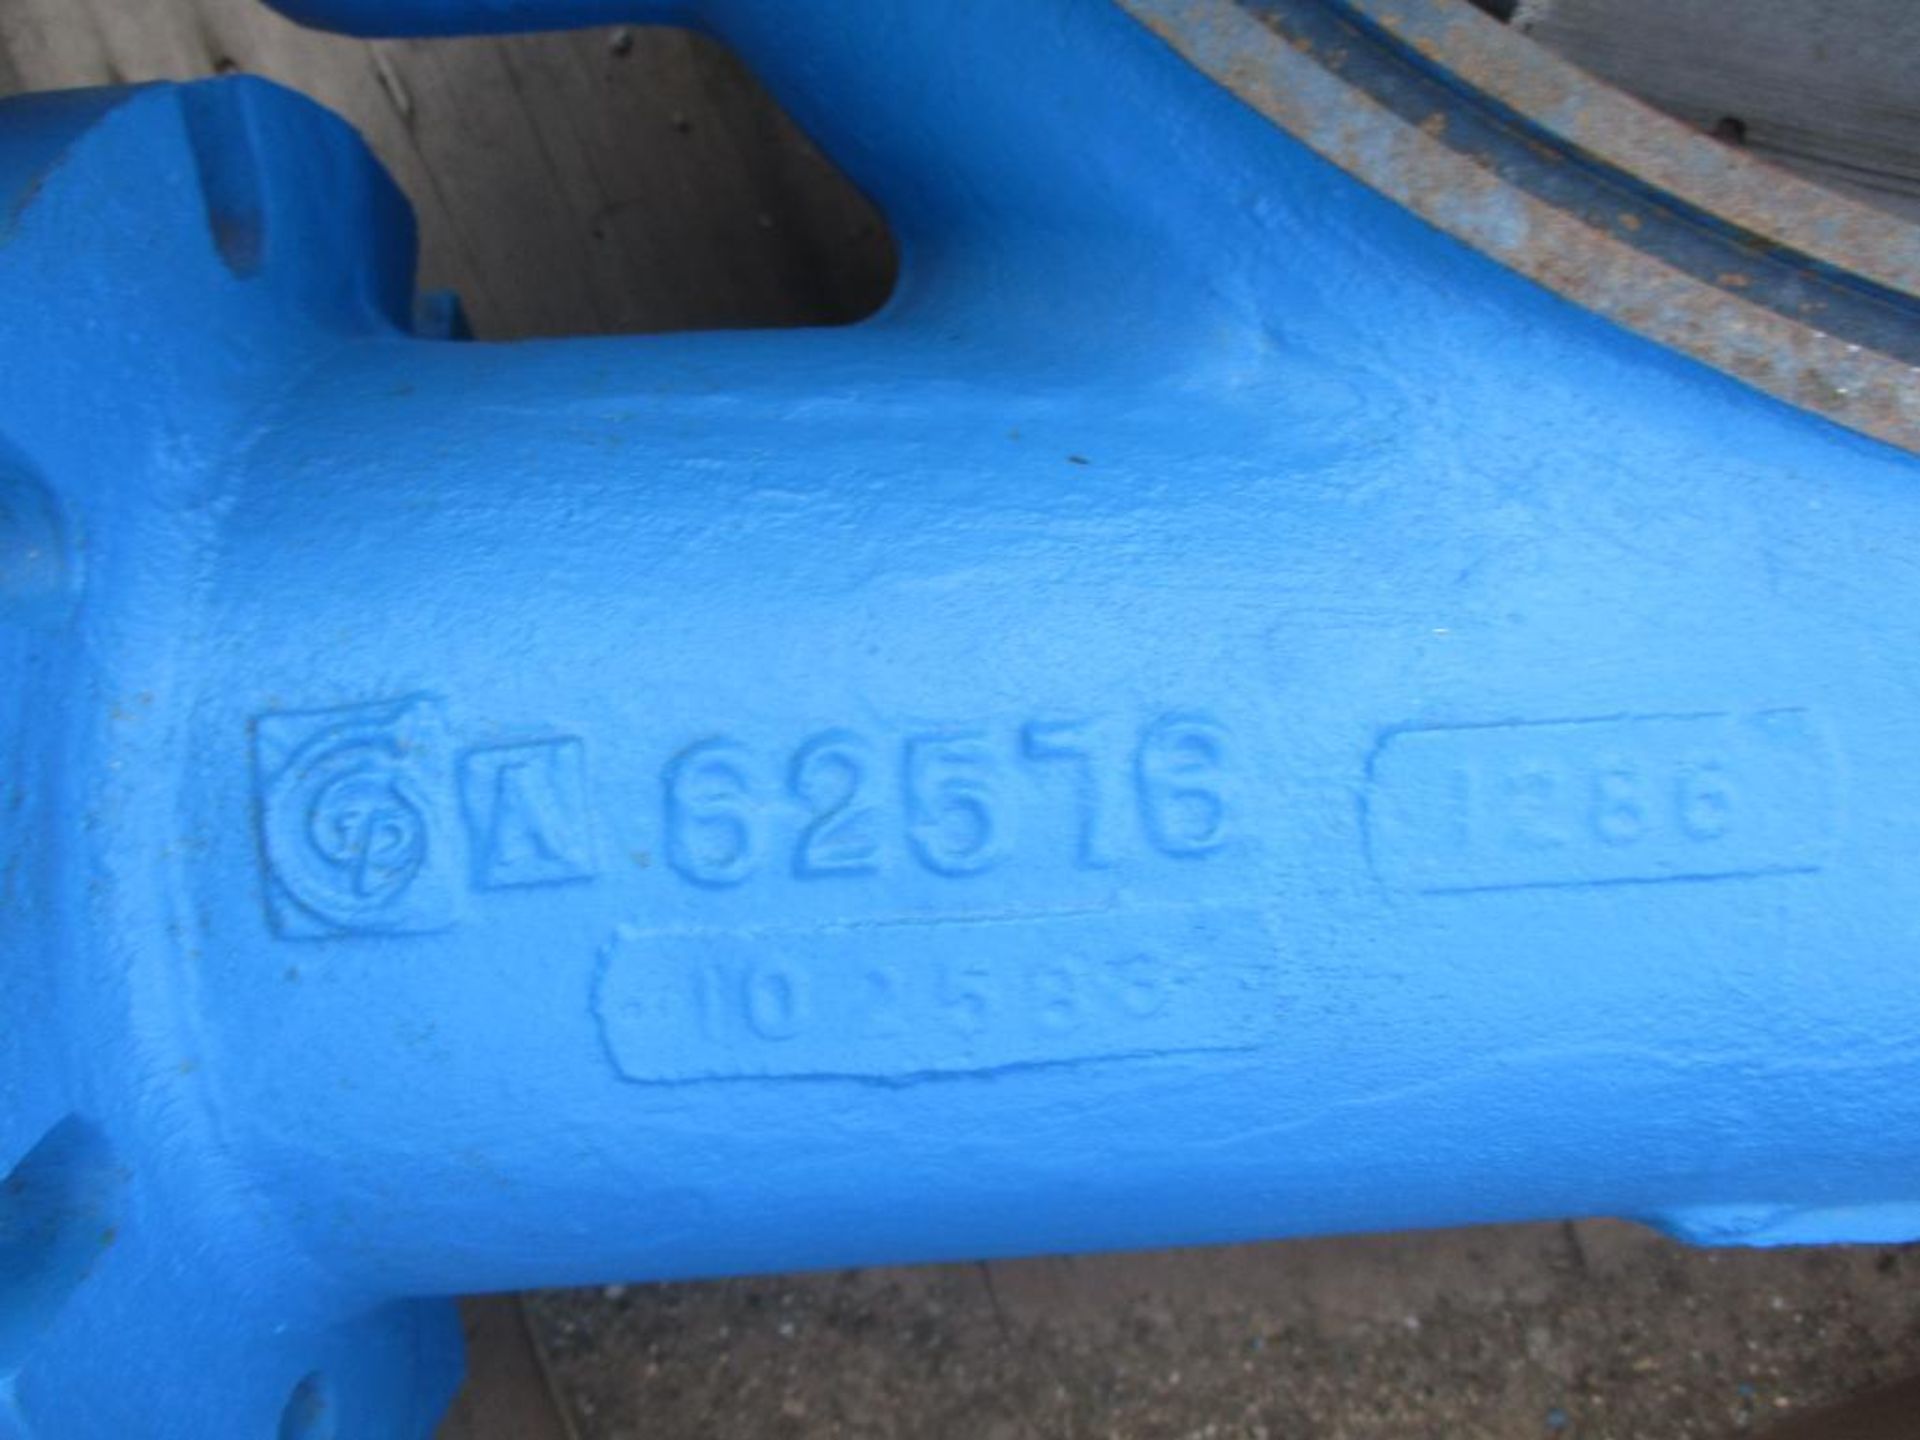 Crate w/ (1) Goulds Slurry Pump Casing (New) - Image 3 of 4